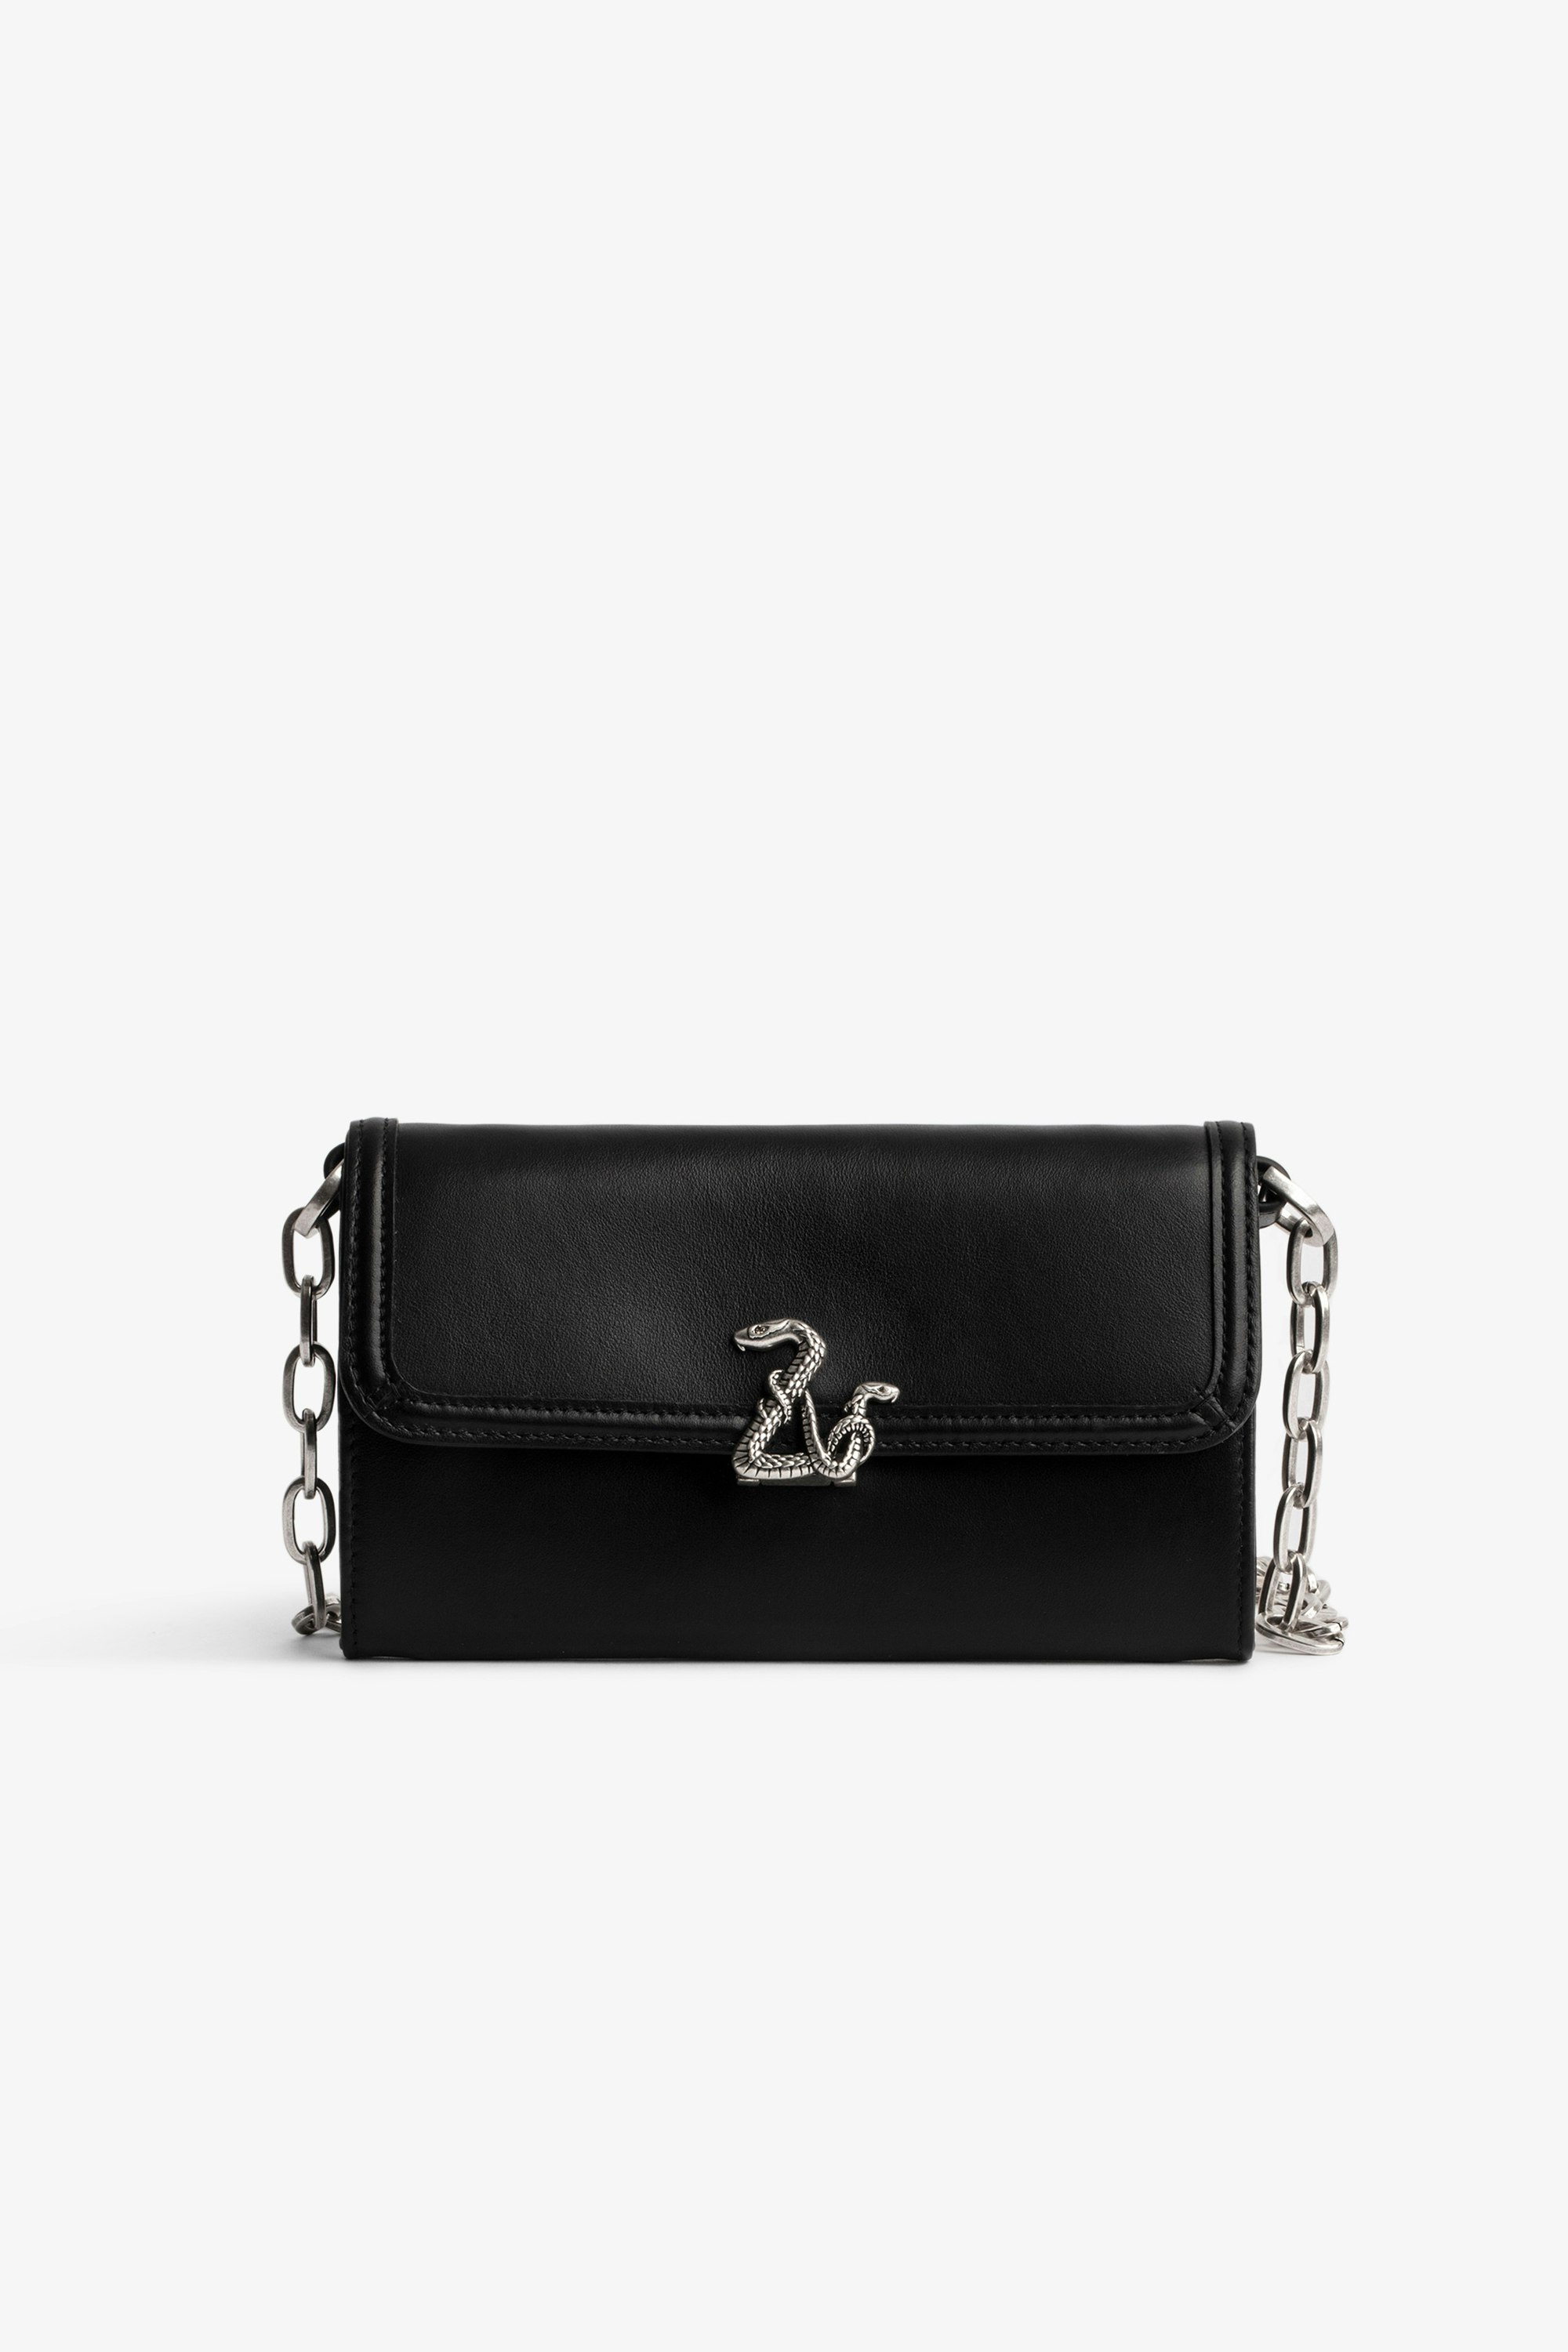 ZV Initiale Snake Le Long 財布 Women’s black leather and ZV snake wallet